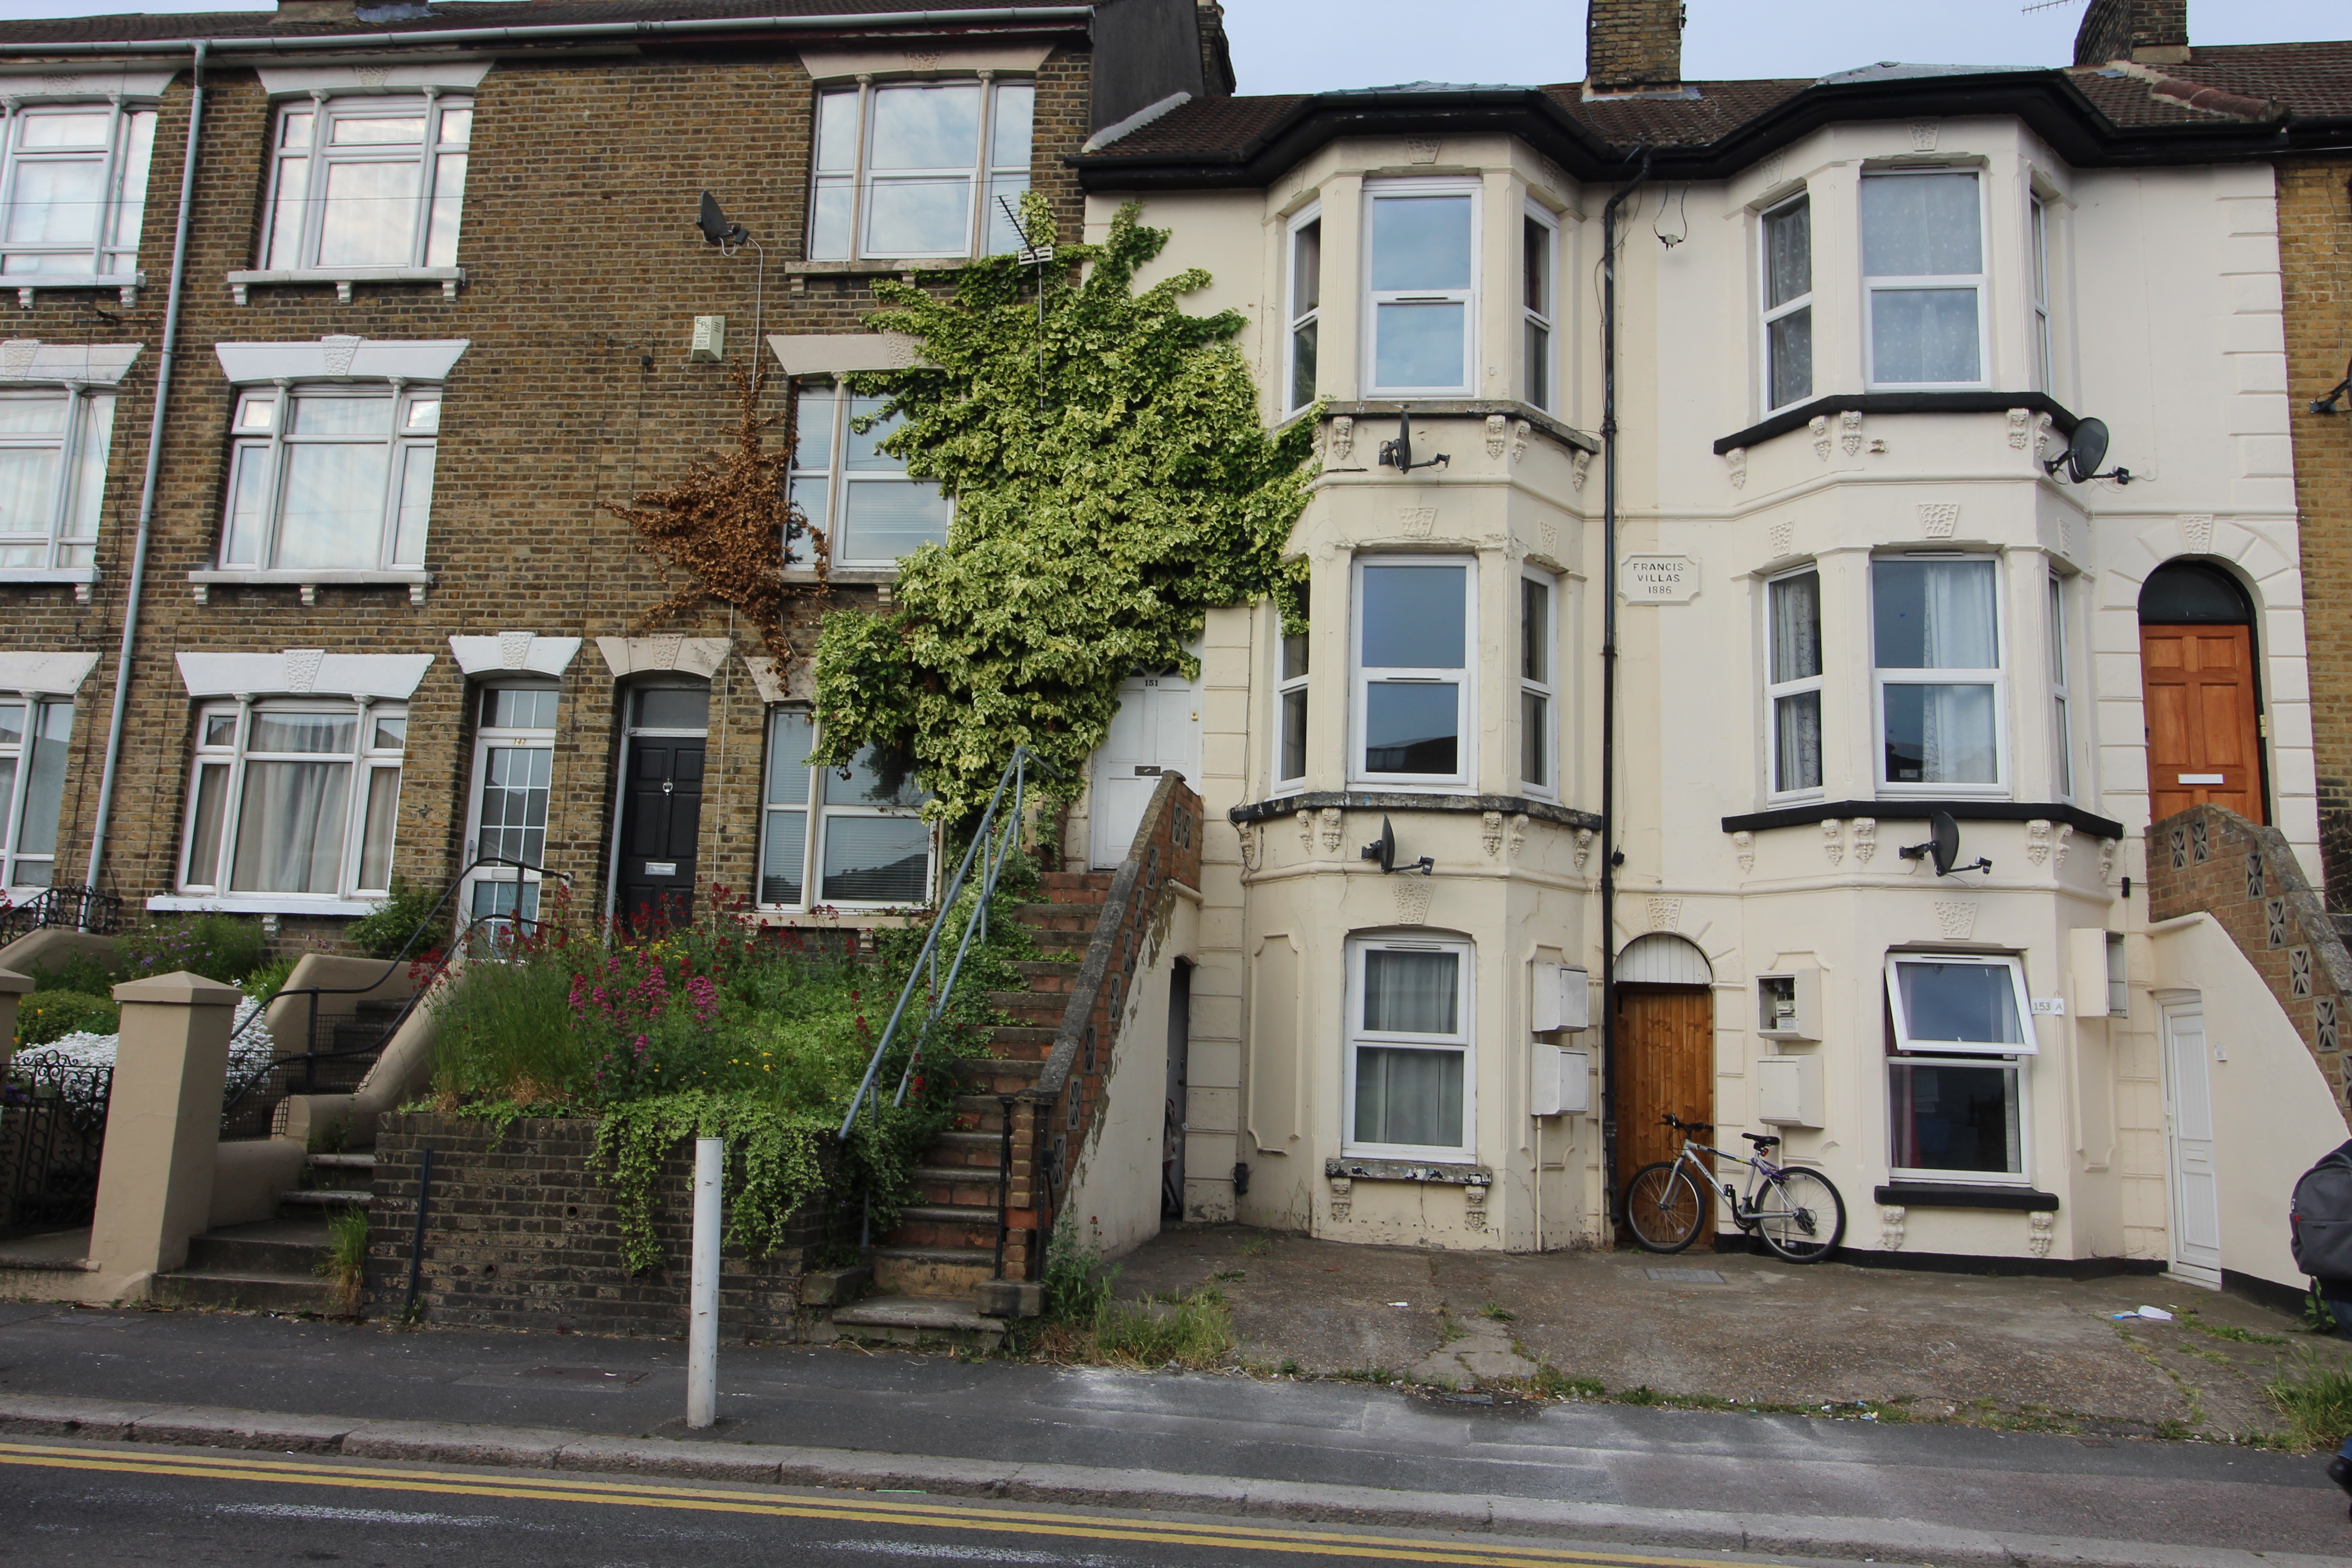 1 bed flat to rent in Luton Road, Chatham, ME4 